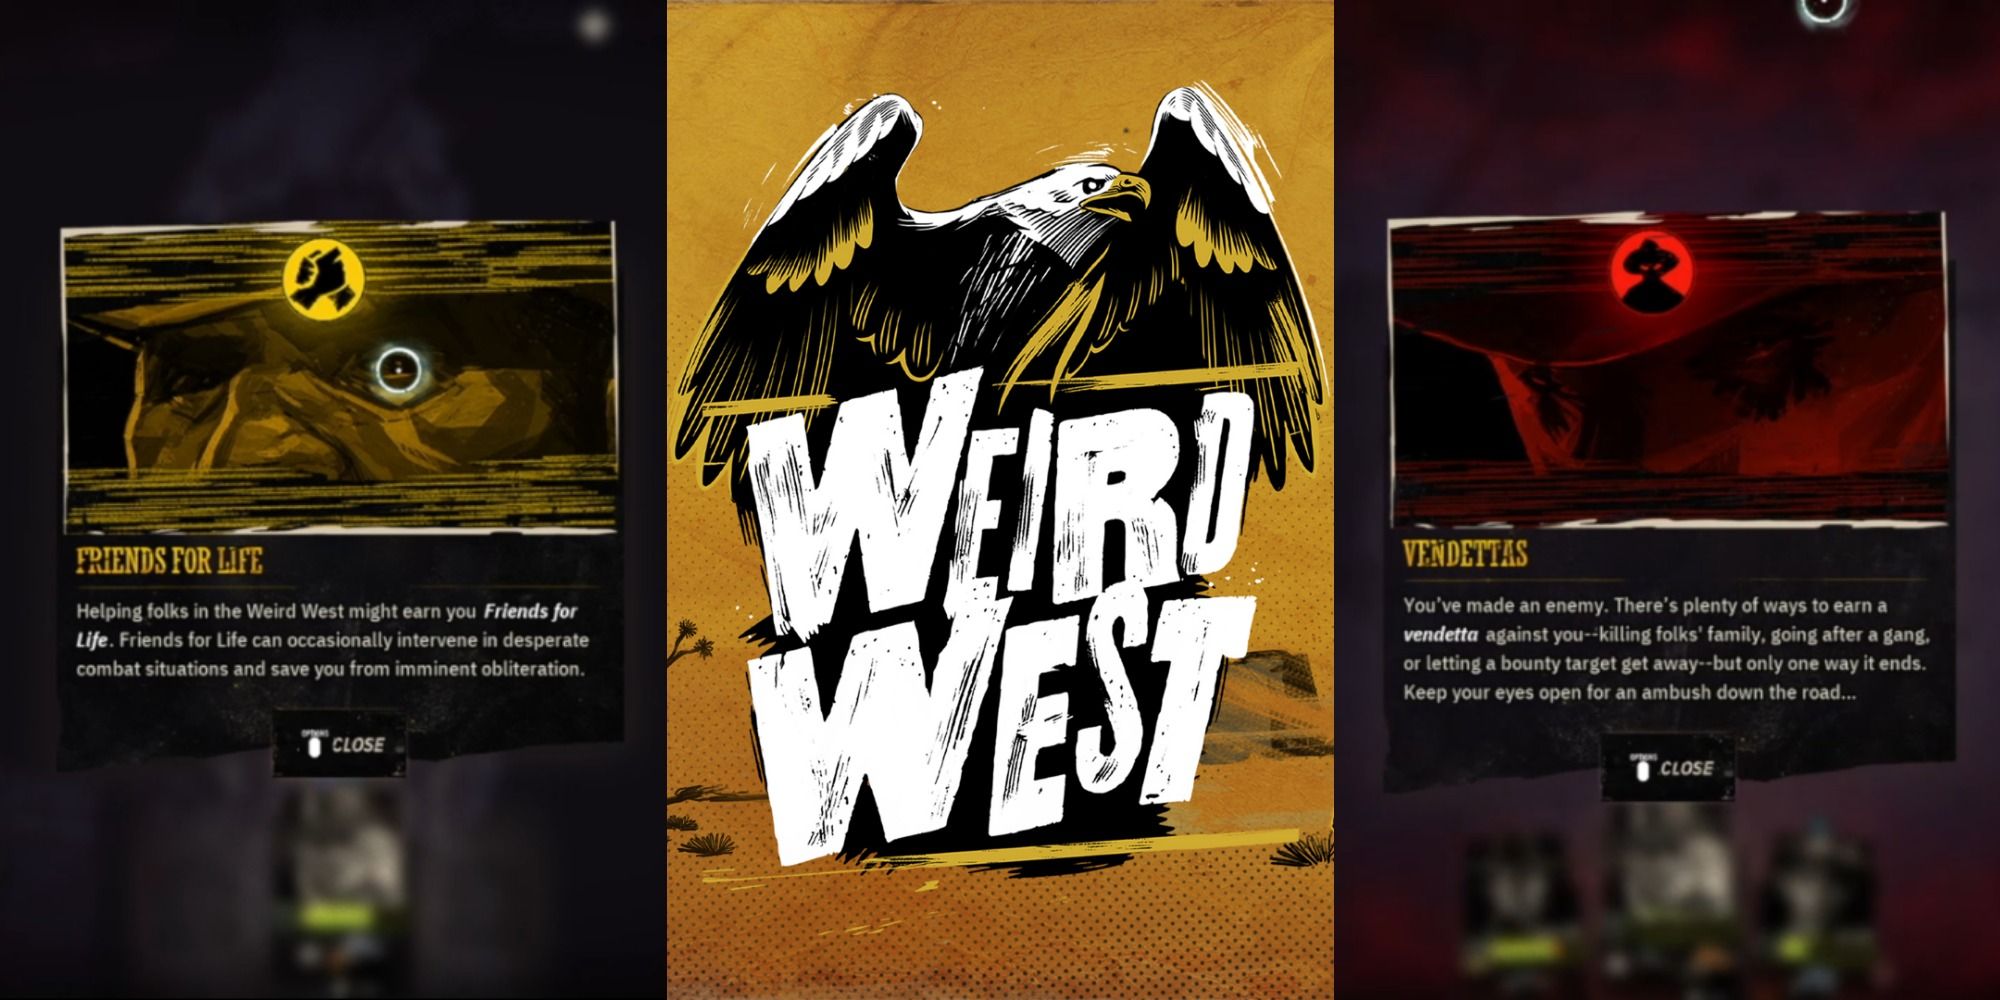 weird west vendettas and friends for life